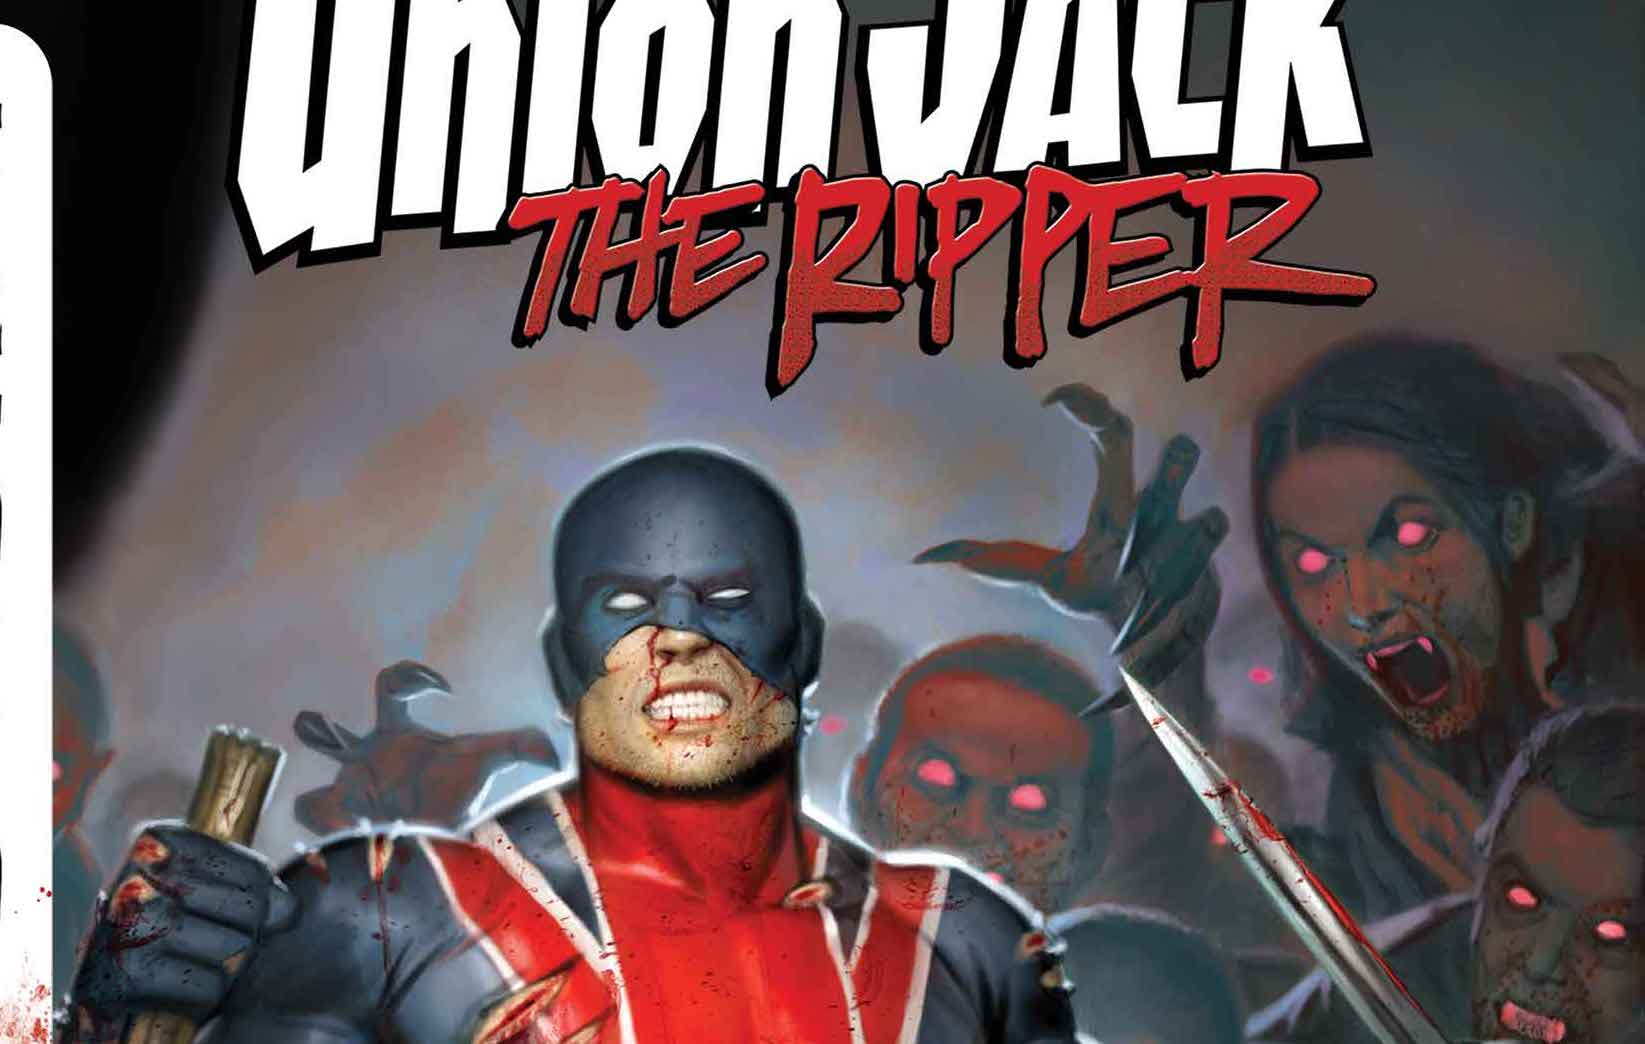 'Union Jack The Ripper: Blood Hunt' #1 out May 15